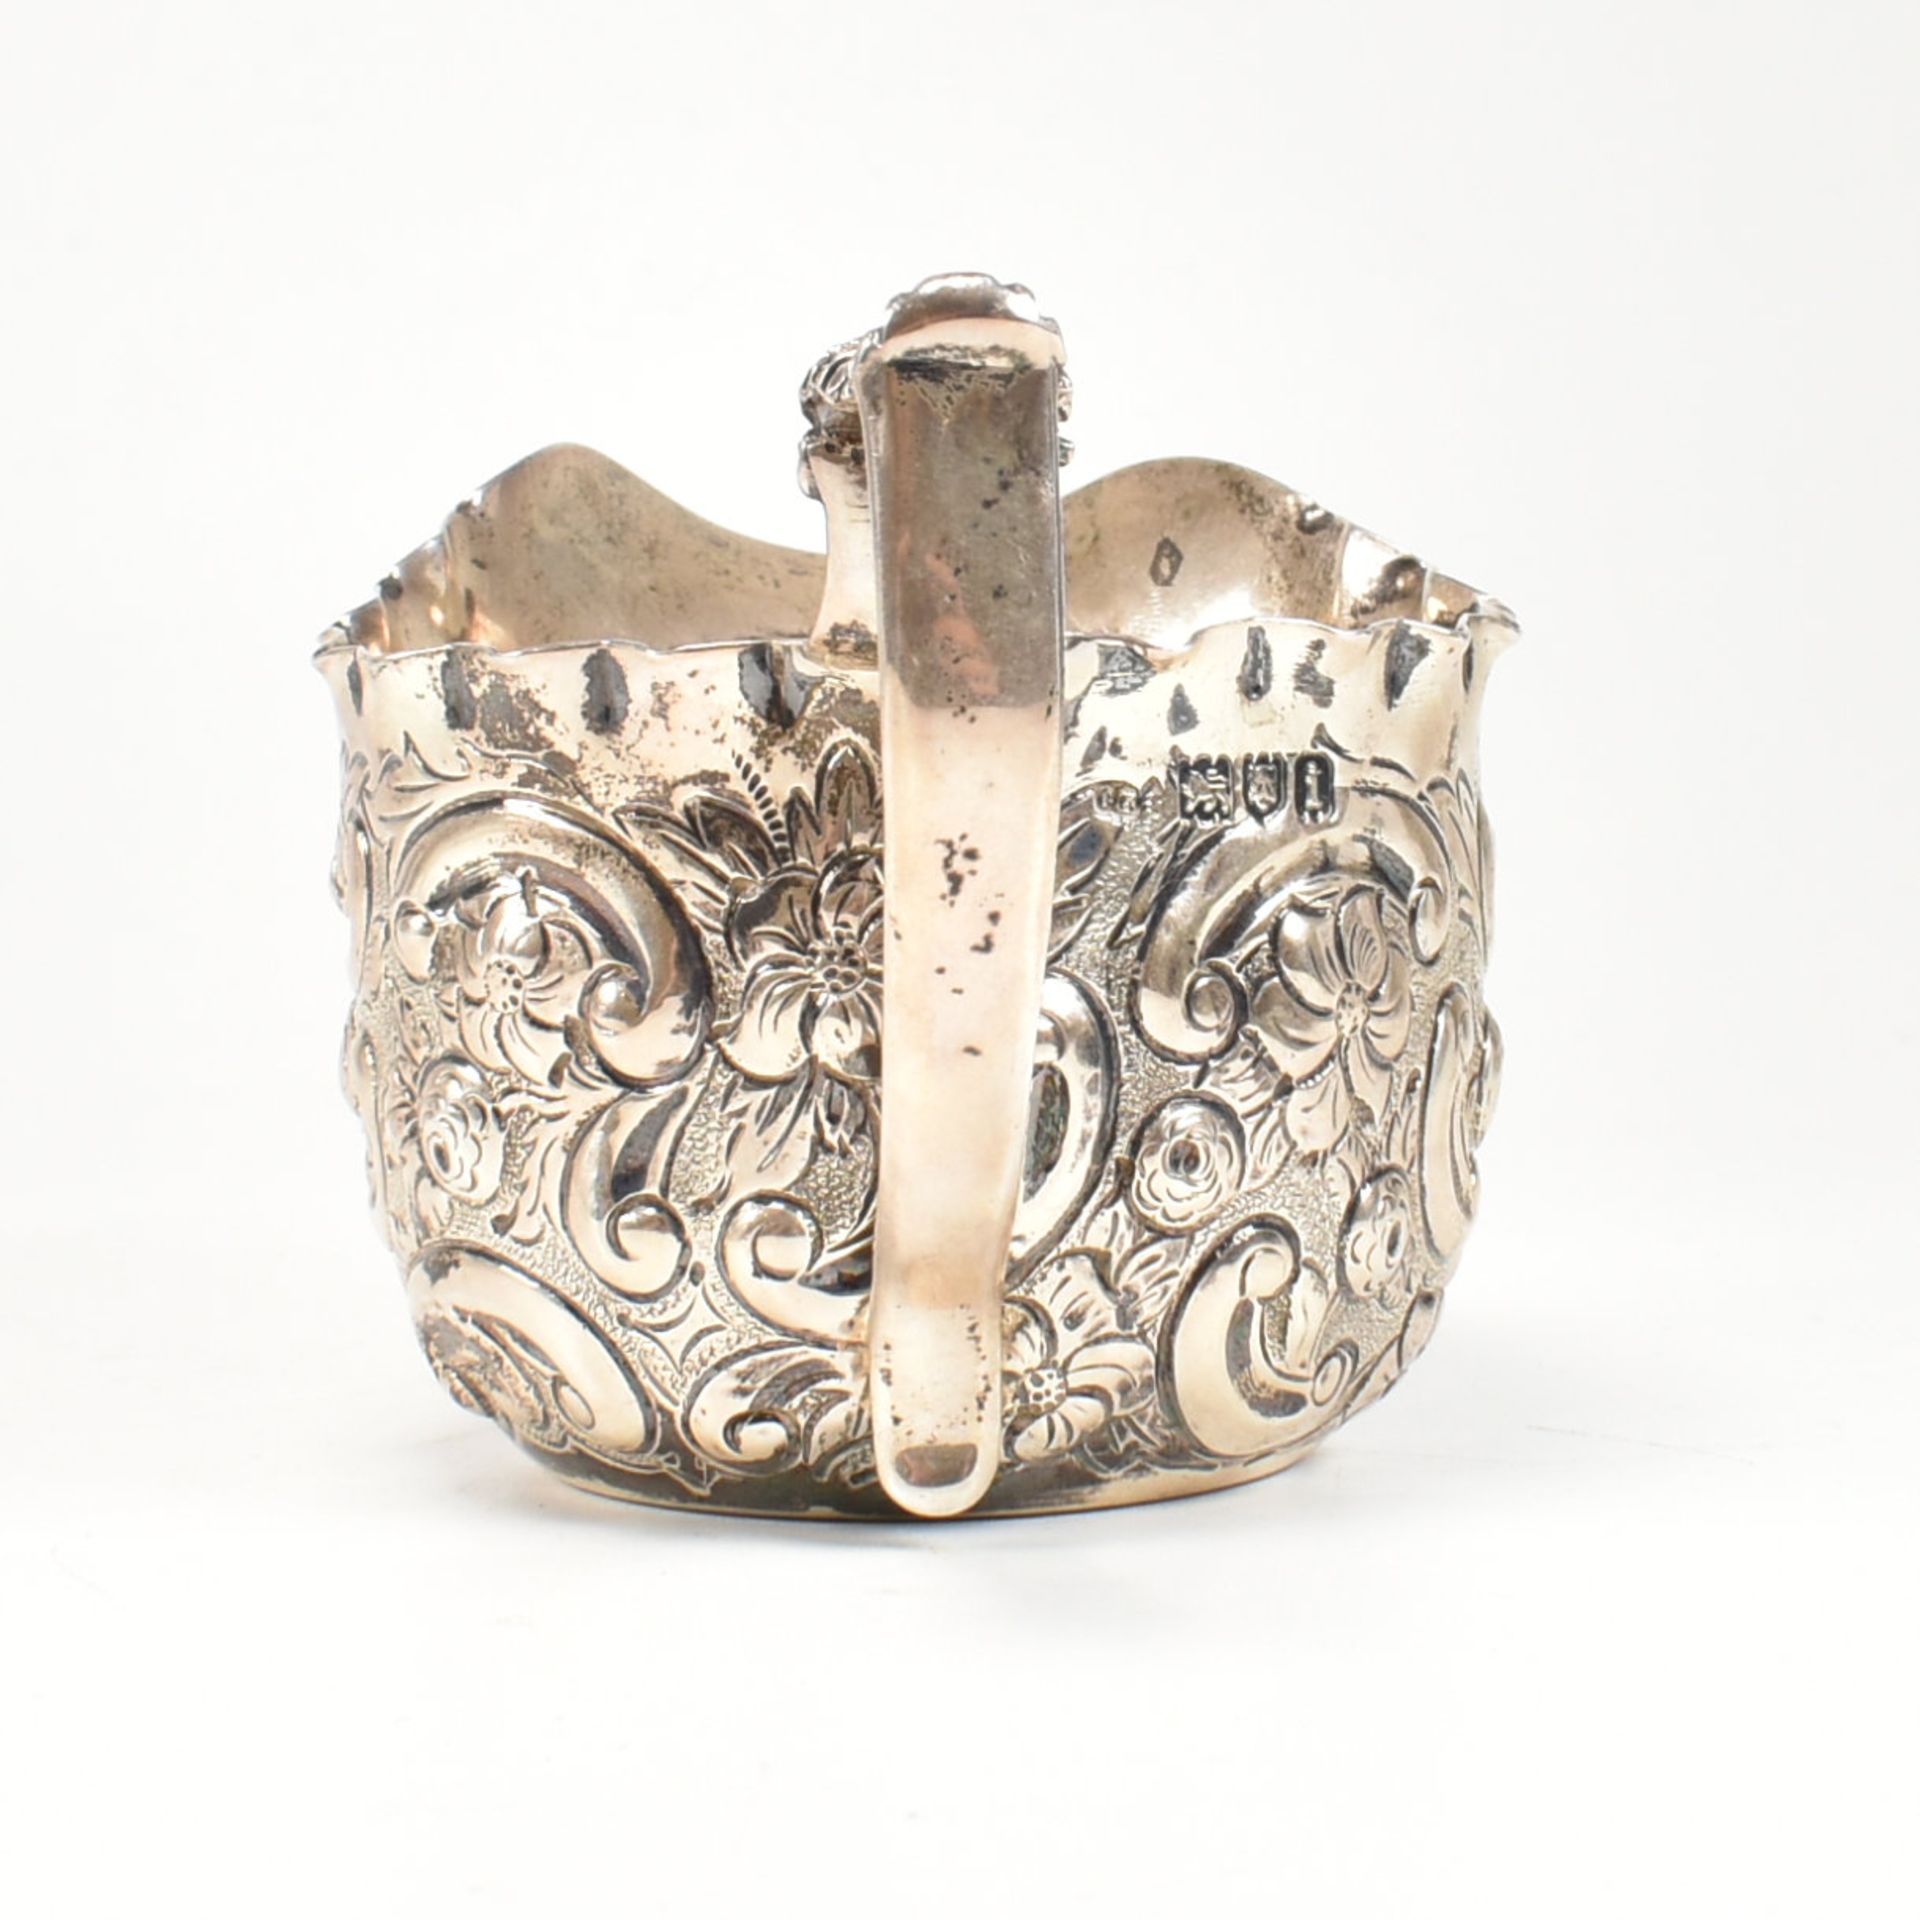 EARLY 20TH CENTURY HALLMARKED SILVER CREAMER - Image 4 of 7